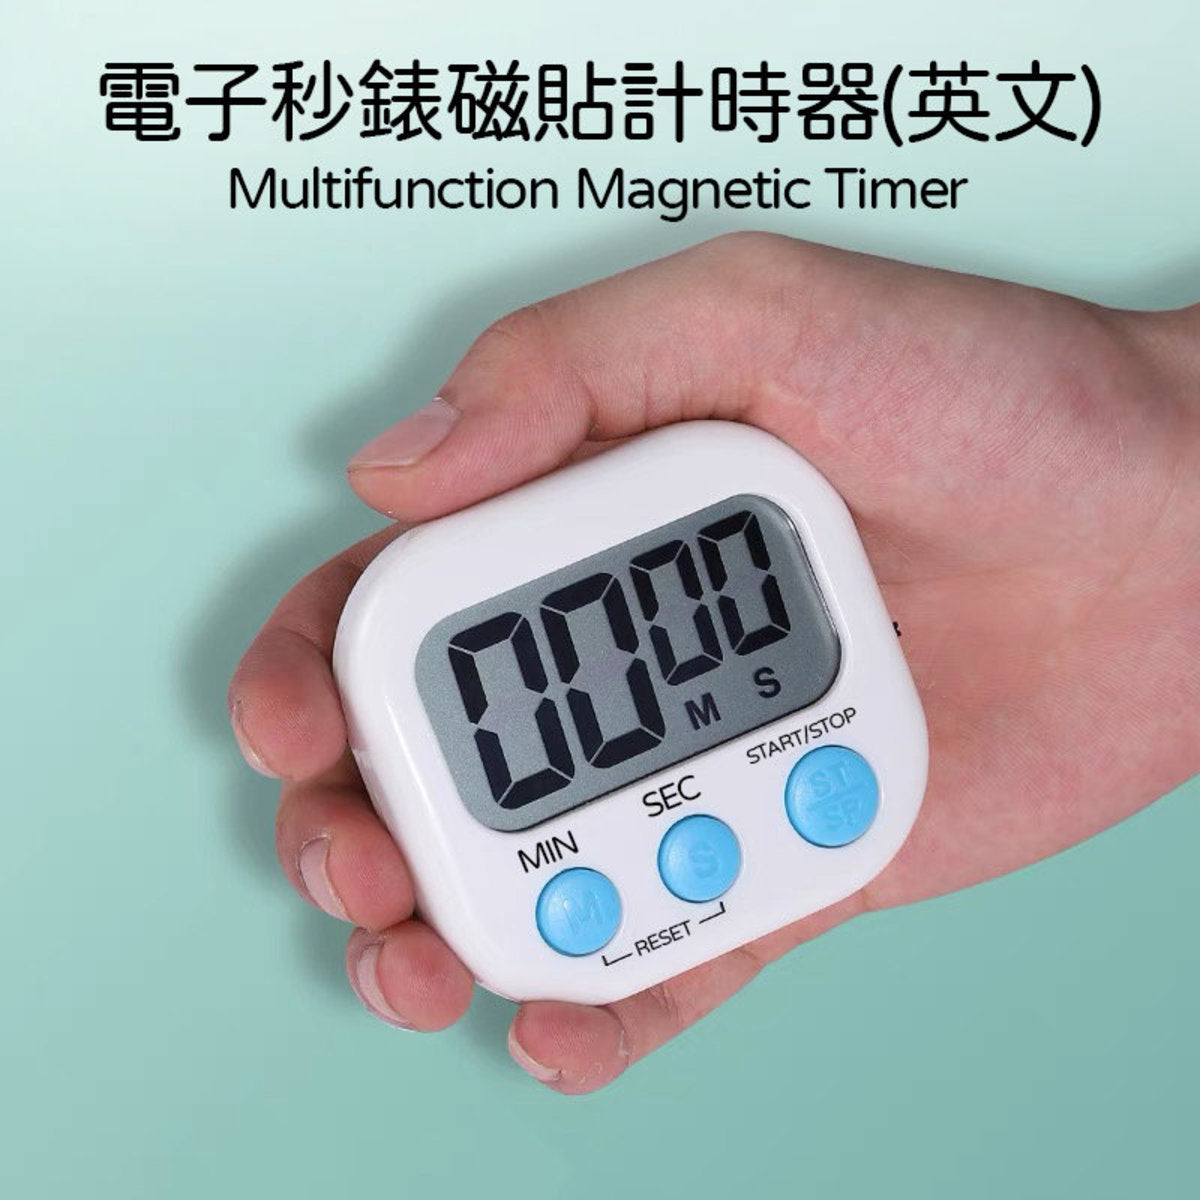 Multifunctional electronic stopwatch timing magnet timer magnetic quartz text white with stand magnet kitchen timer countdown timer electronic reminder LCD screen timing seconds baking timing back magnetic timing mini electronic clock